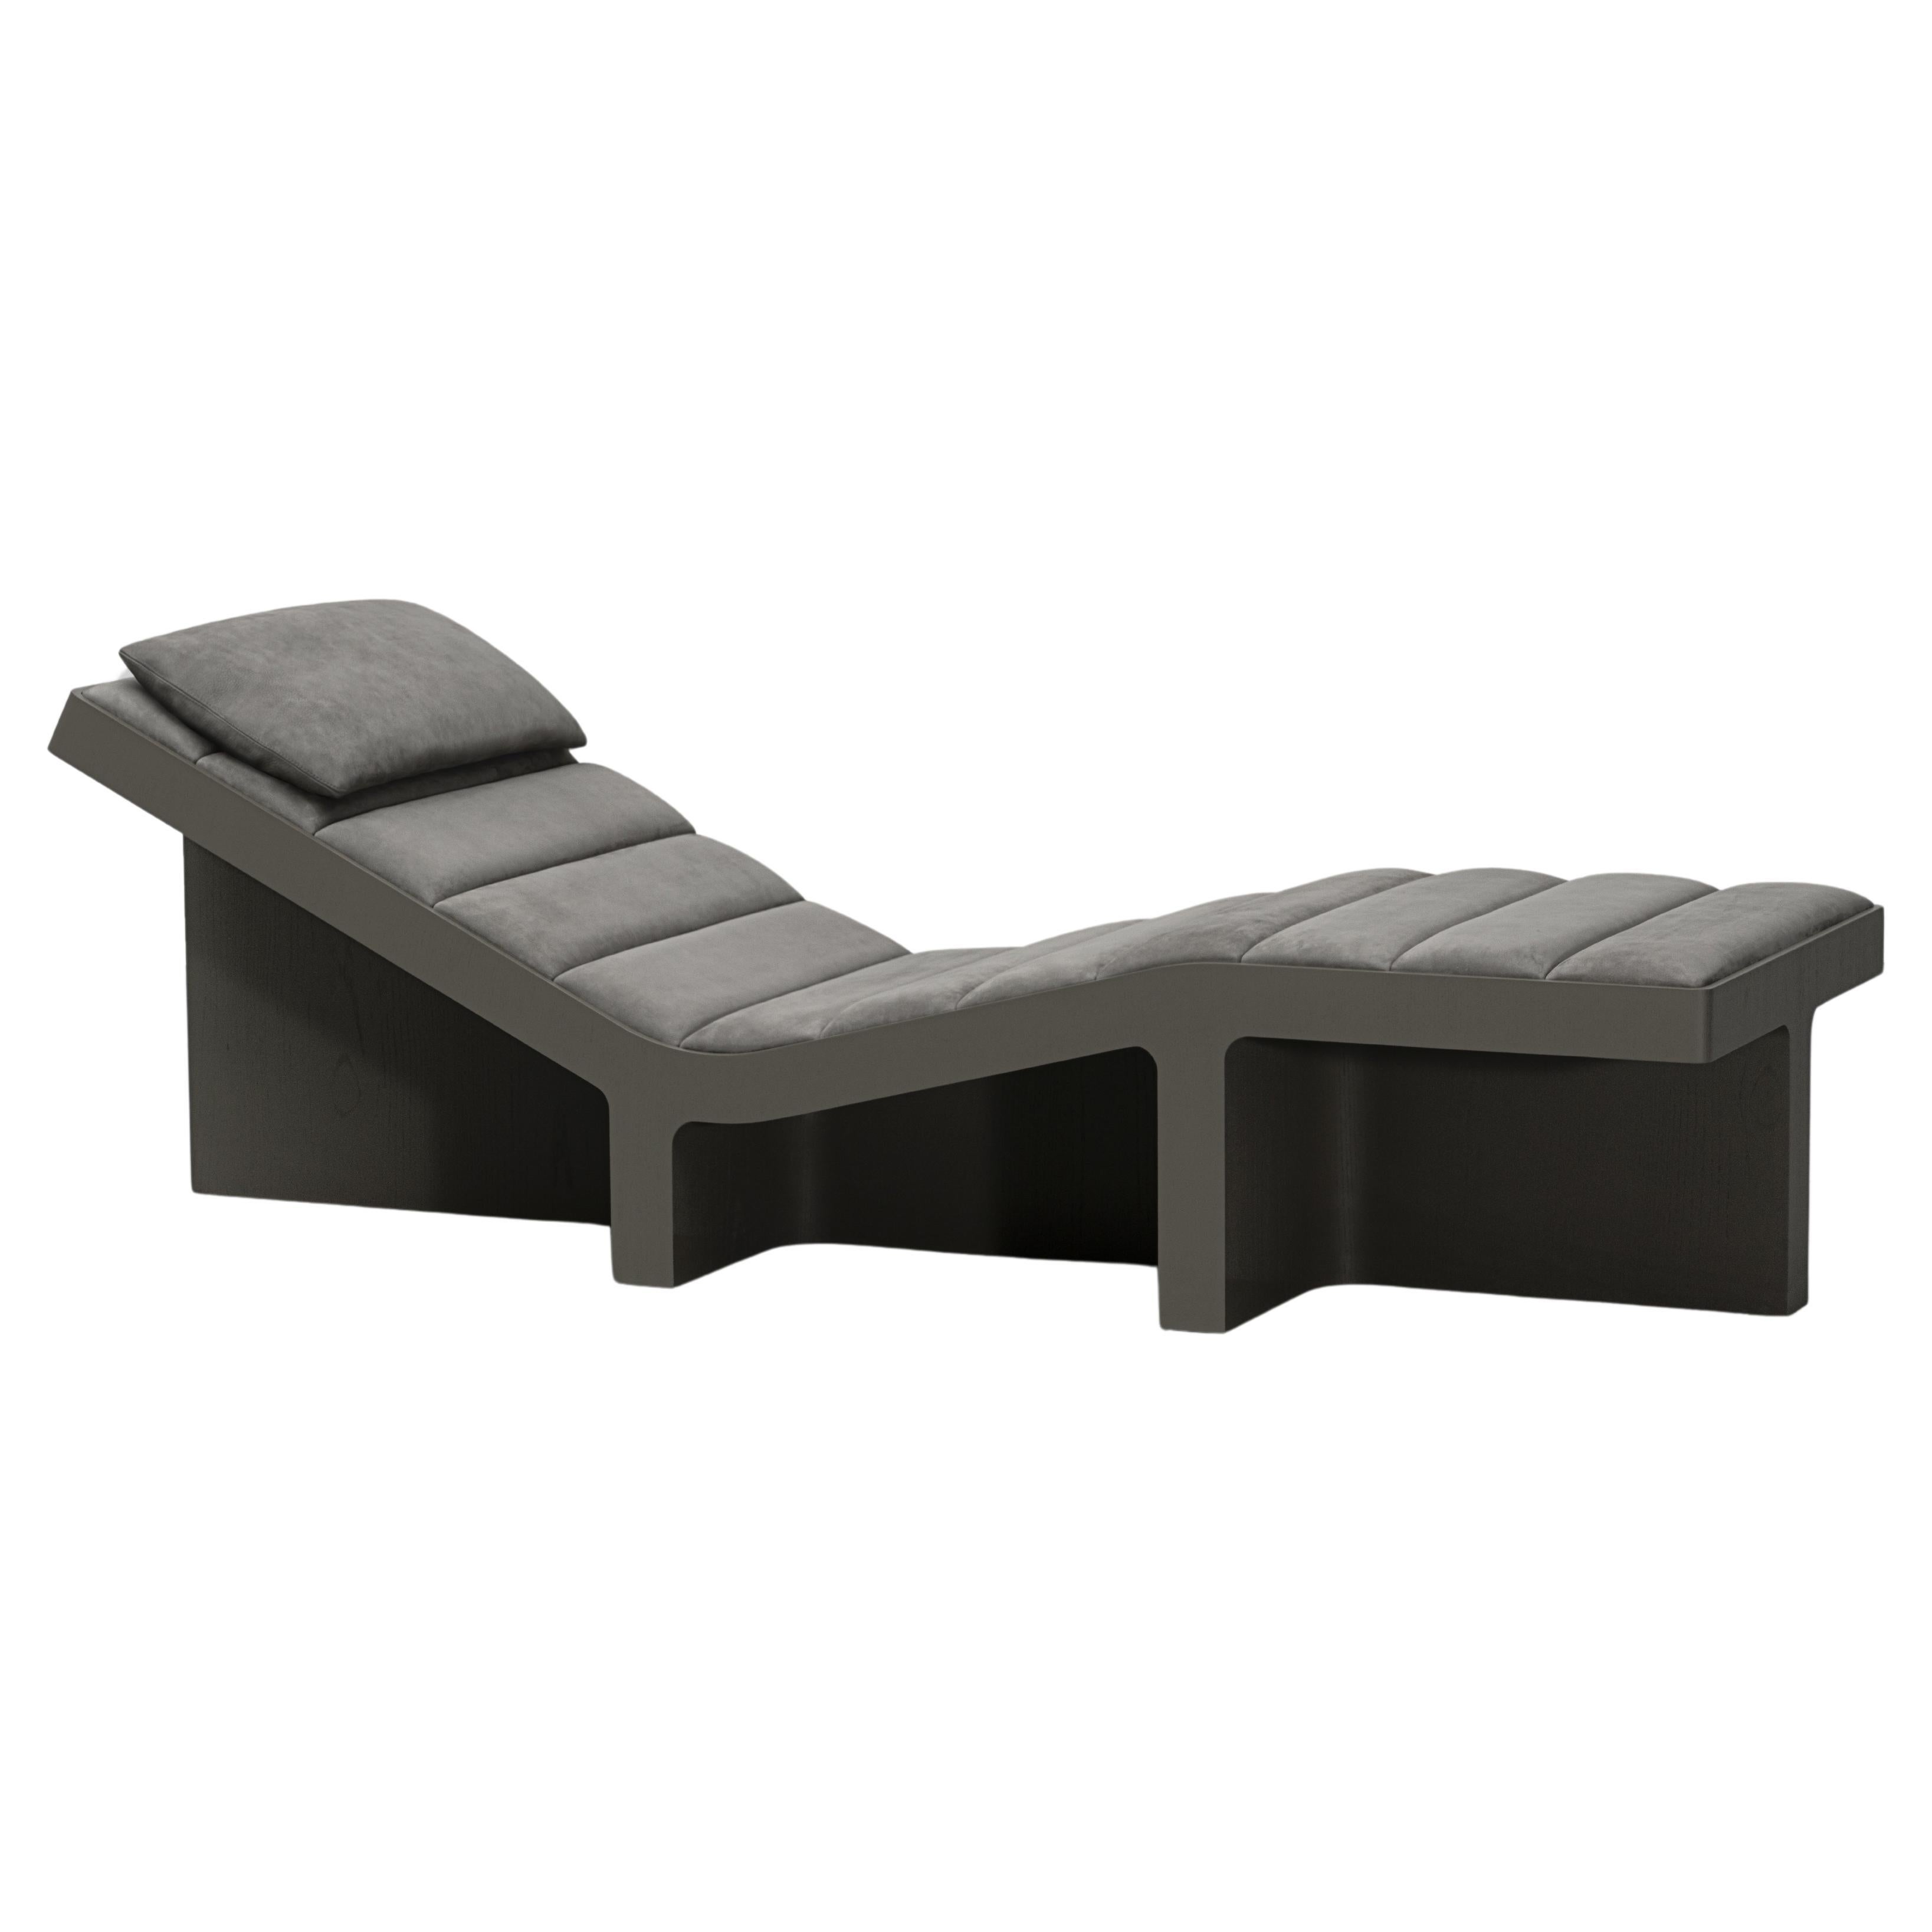 Chaise longue Contemporary Grey ash Weight of Shadow par Atelier V&F